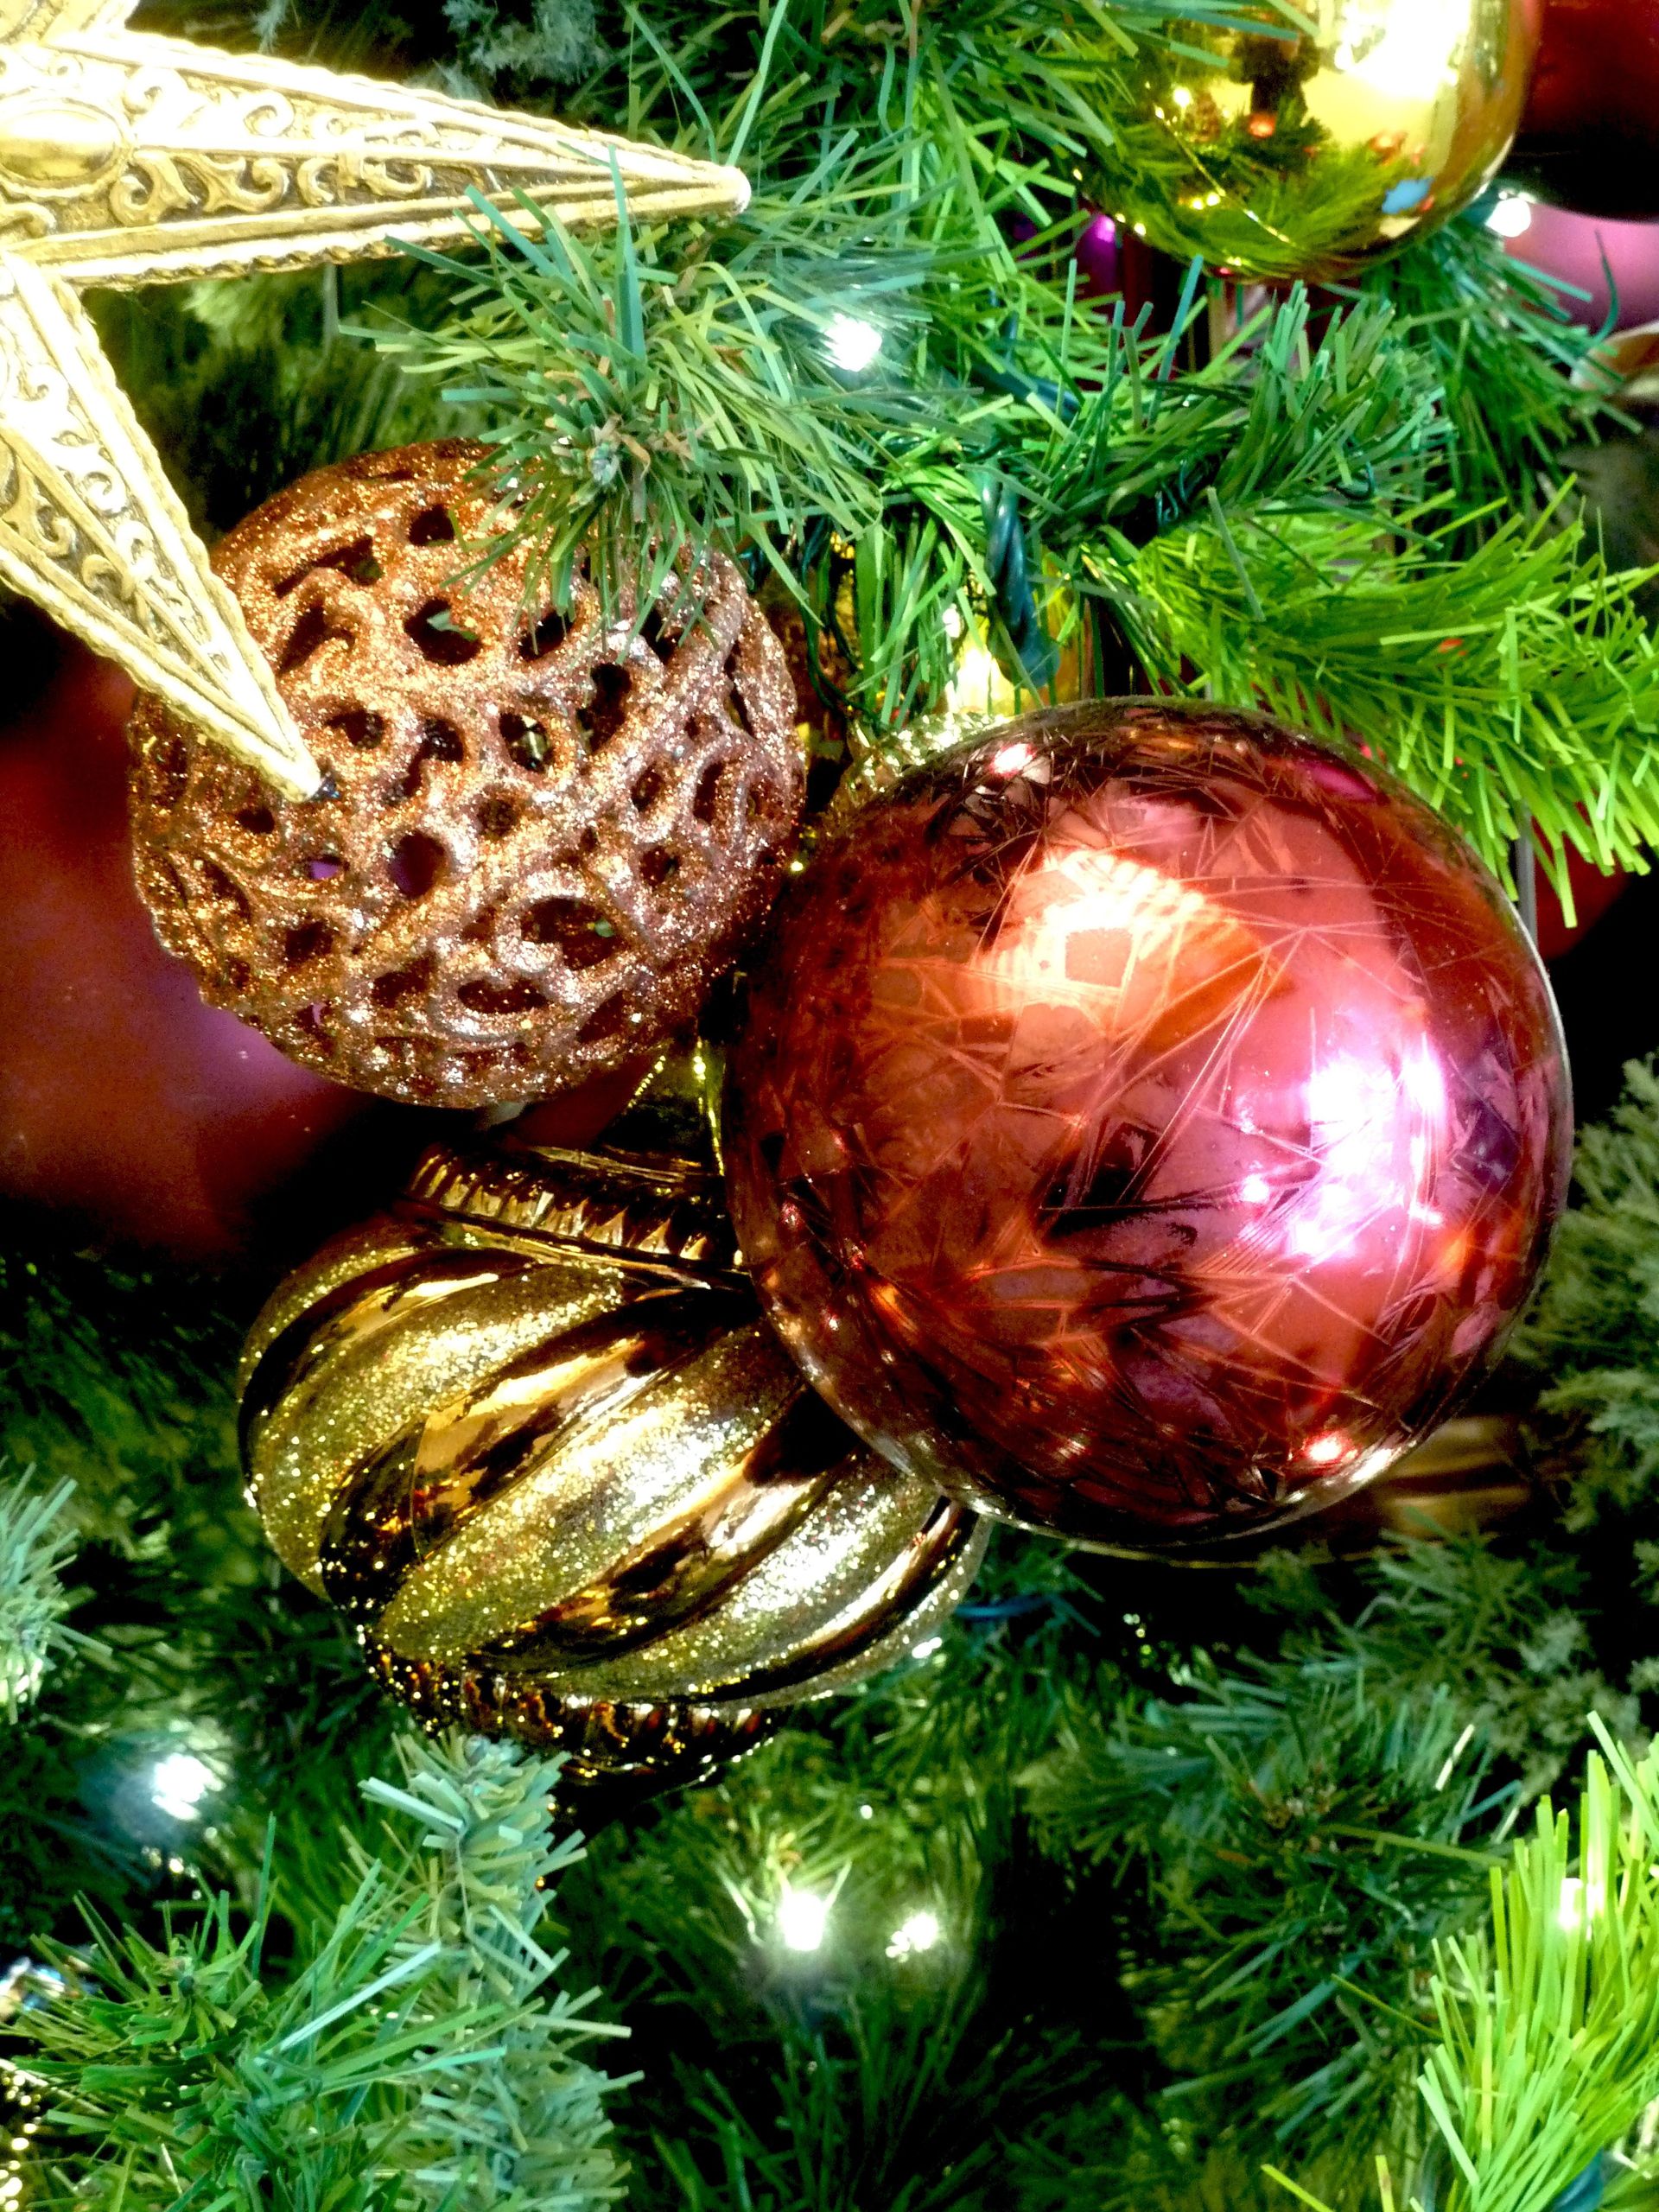 A group of ornaments hanging on a Christmas tree.